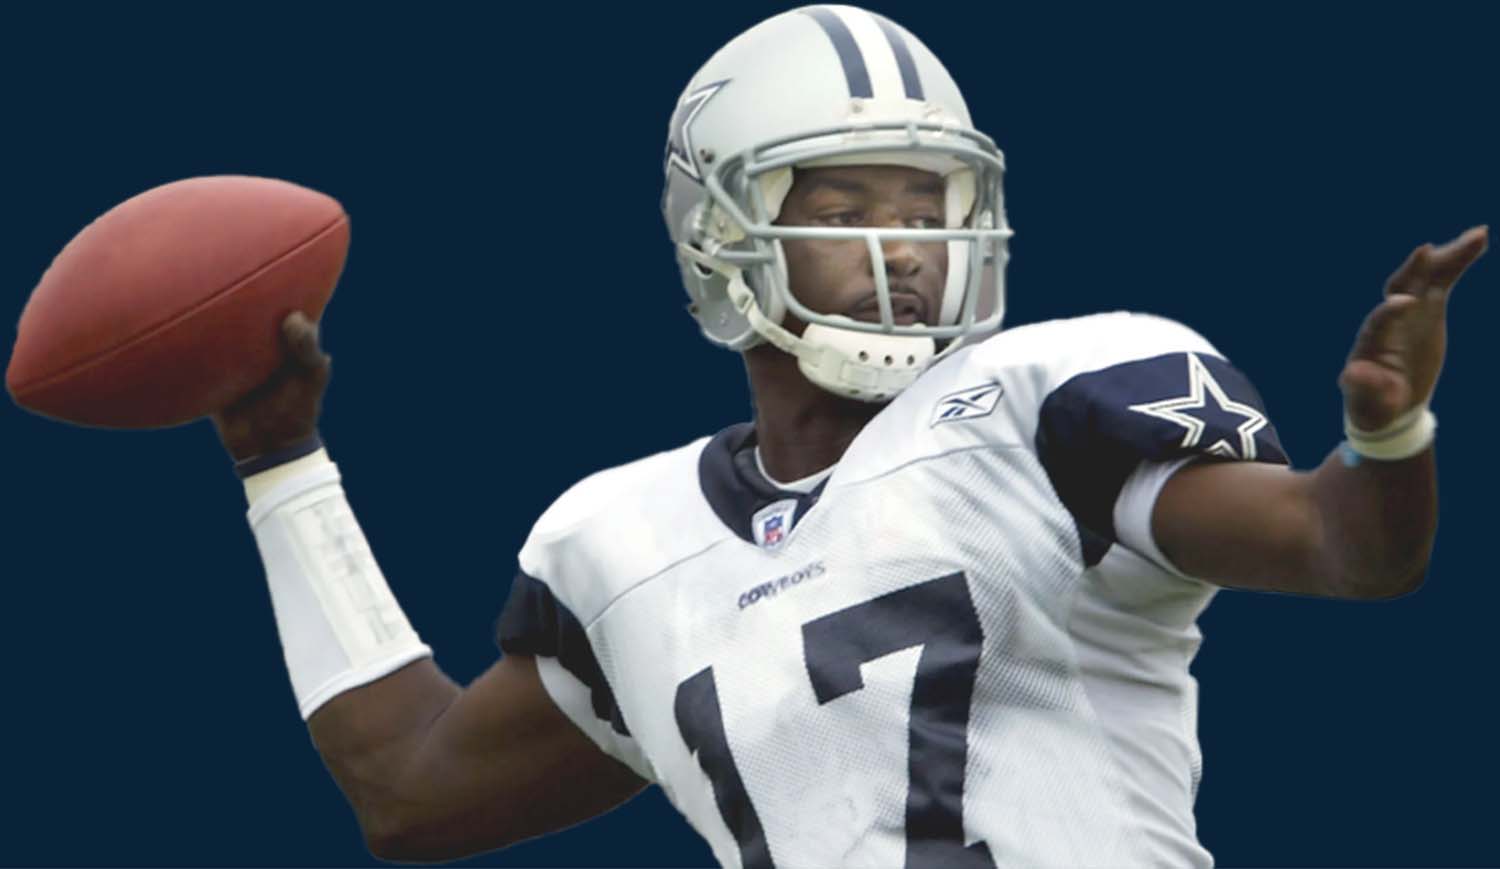 Quarterback Quincy Carter in throwing motion